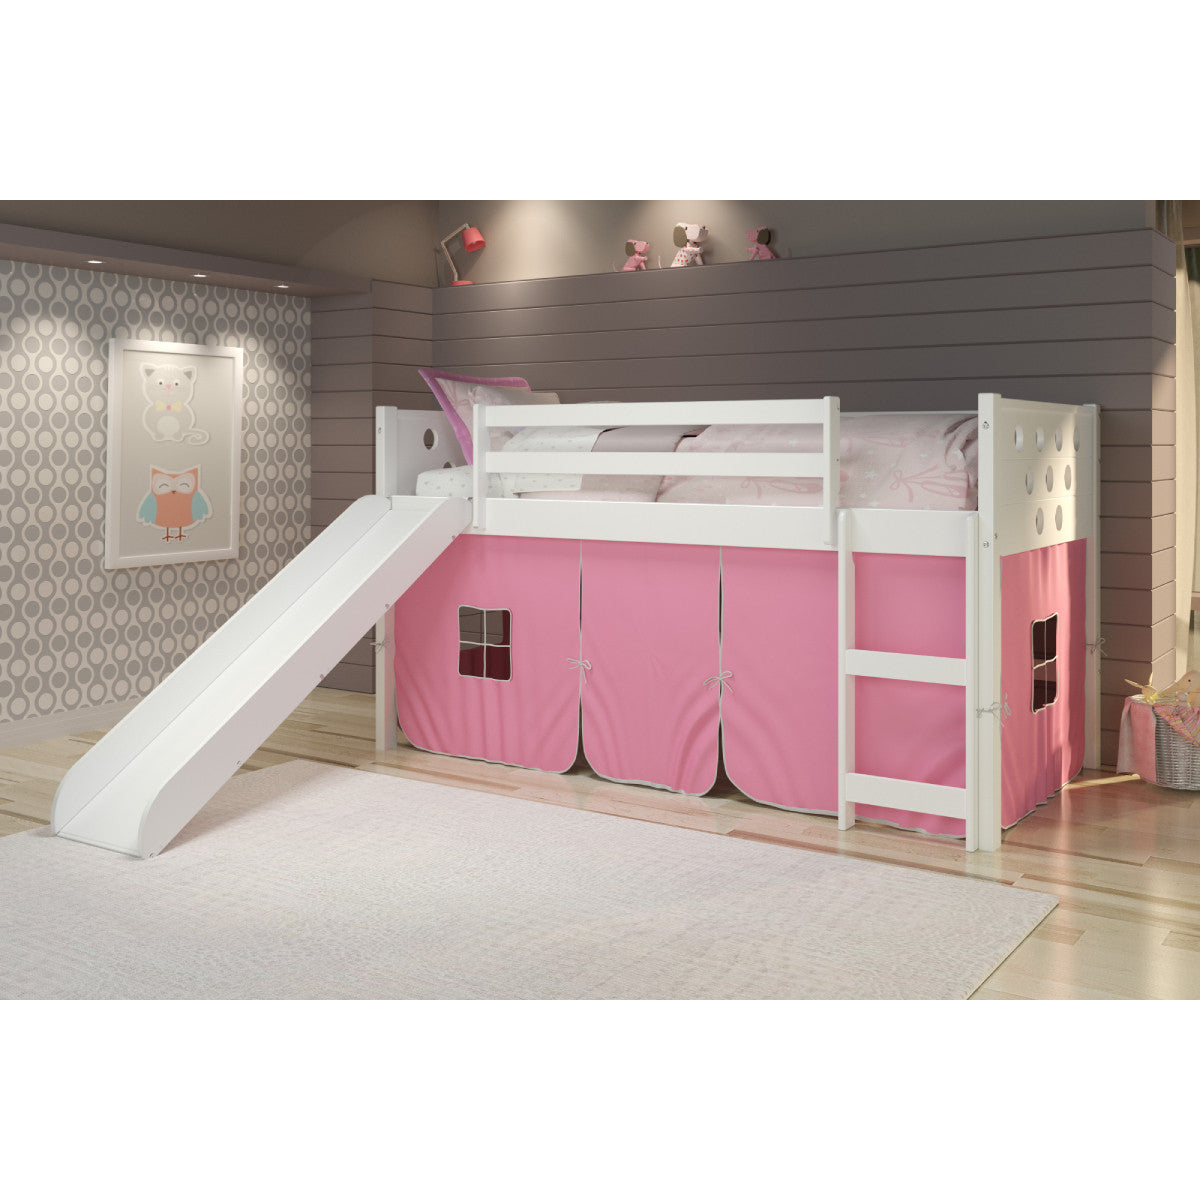 TWIN CIRCLES LOW LOFT W/SLIDE & PINK TENT KIT IN WHITE FINISH